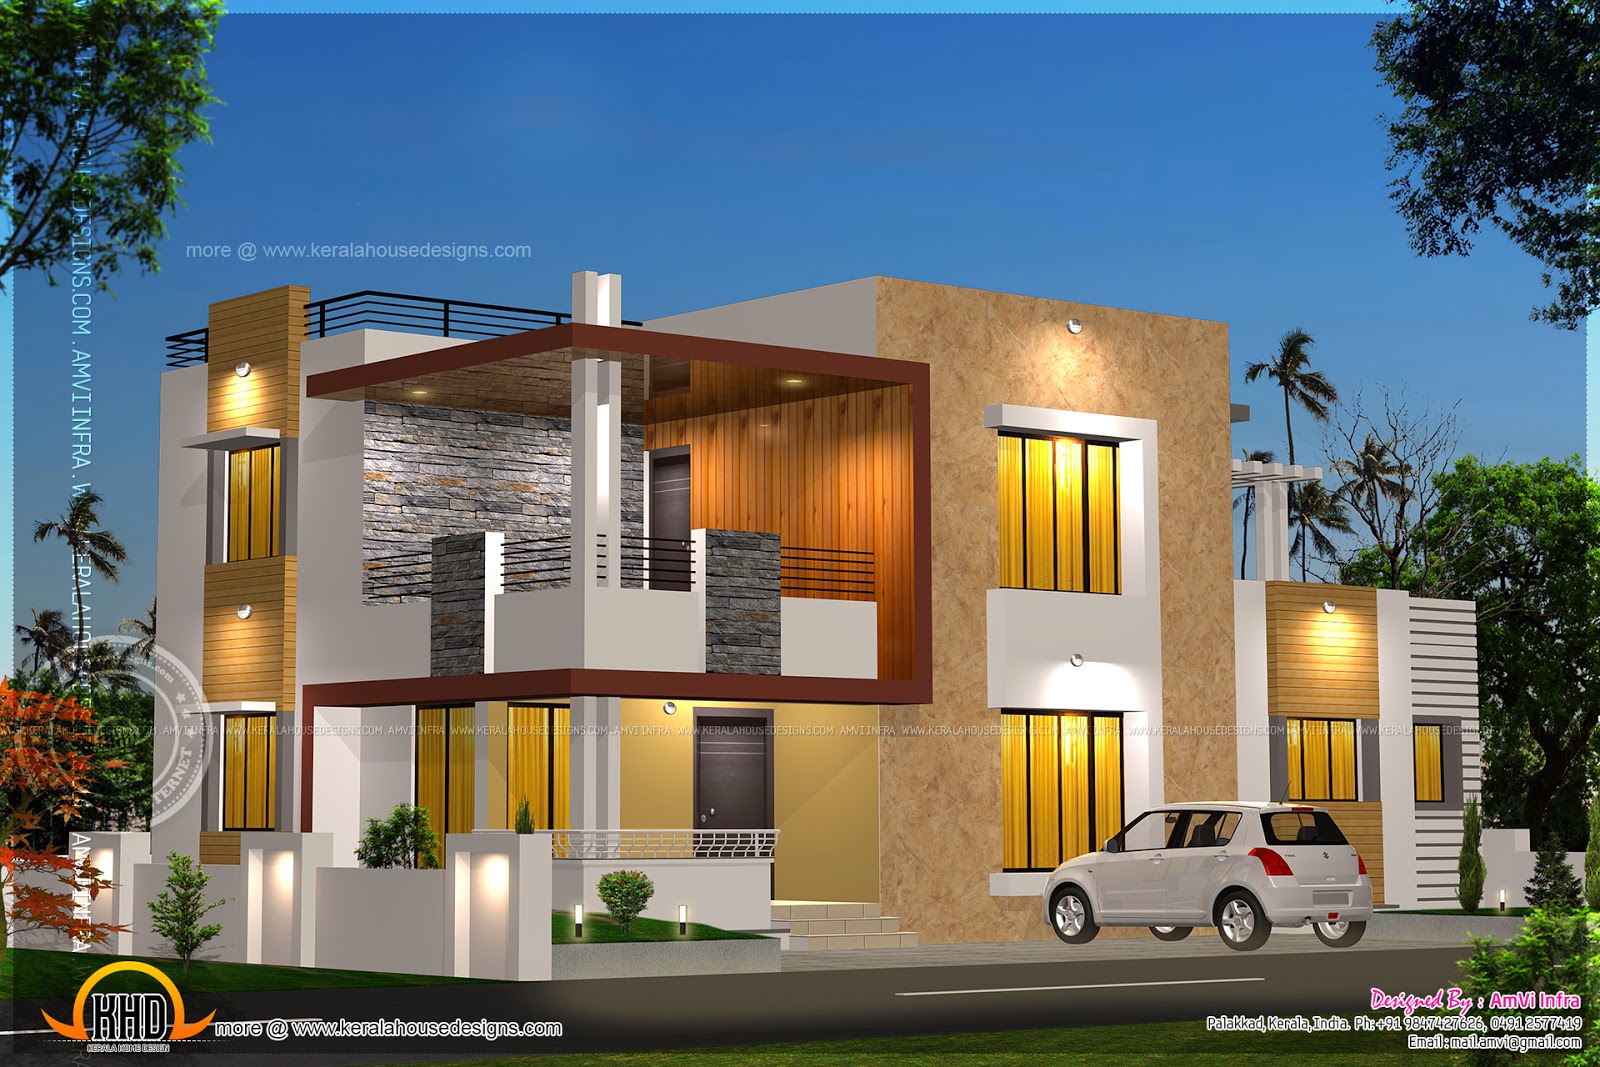 Floor plan  and elevation  of modern  house  Kerala home  